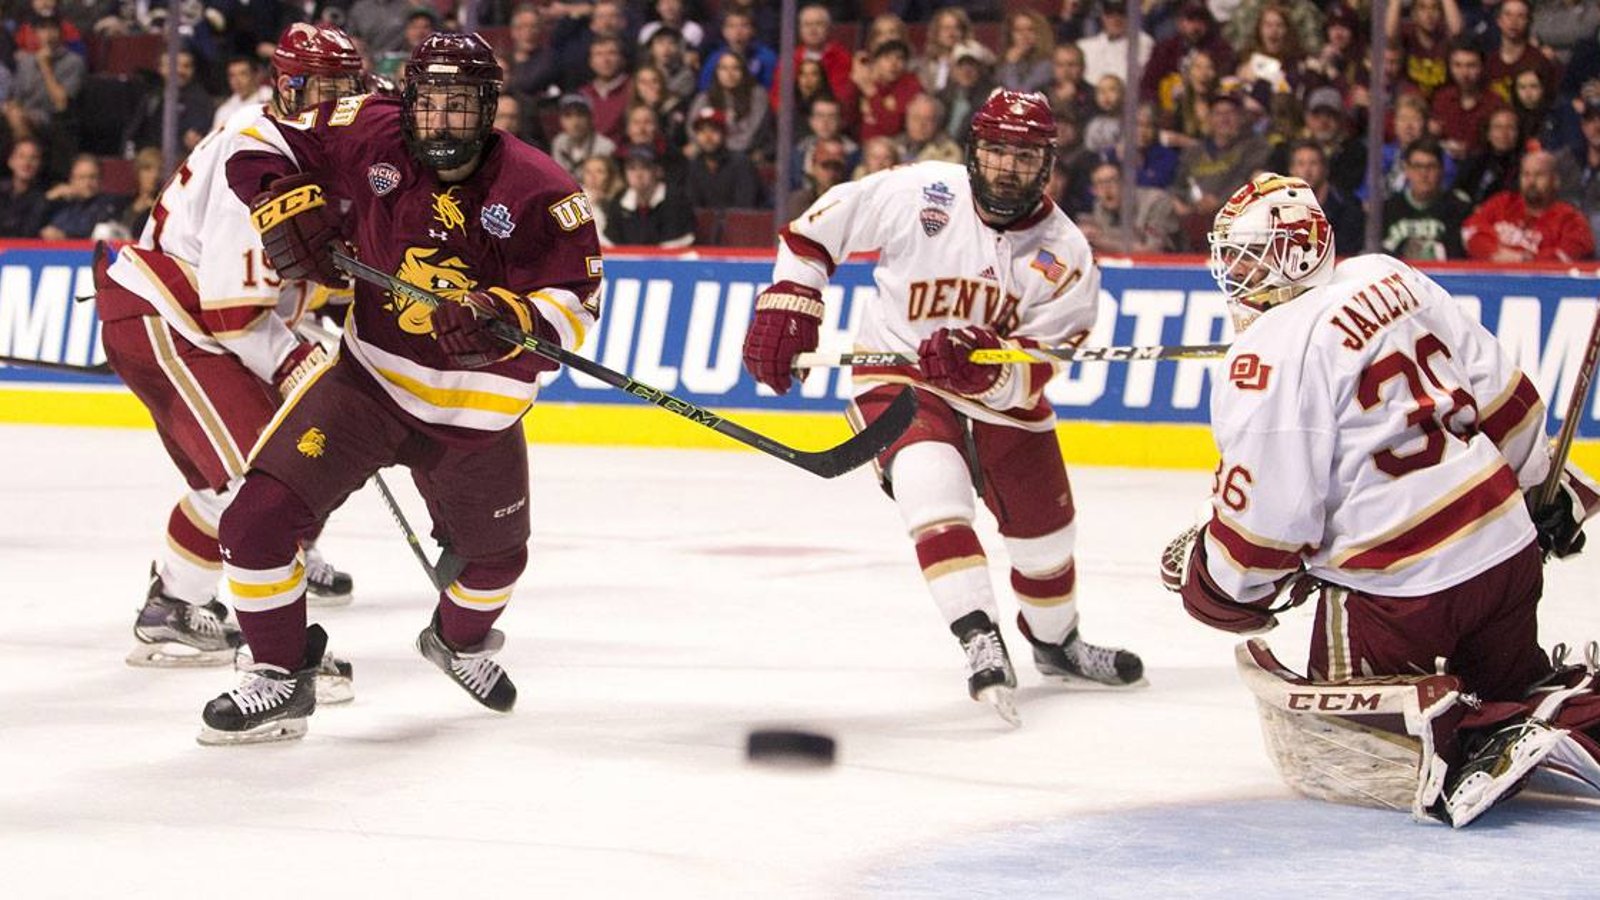 Top NCAA free agent turns his back on his team